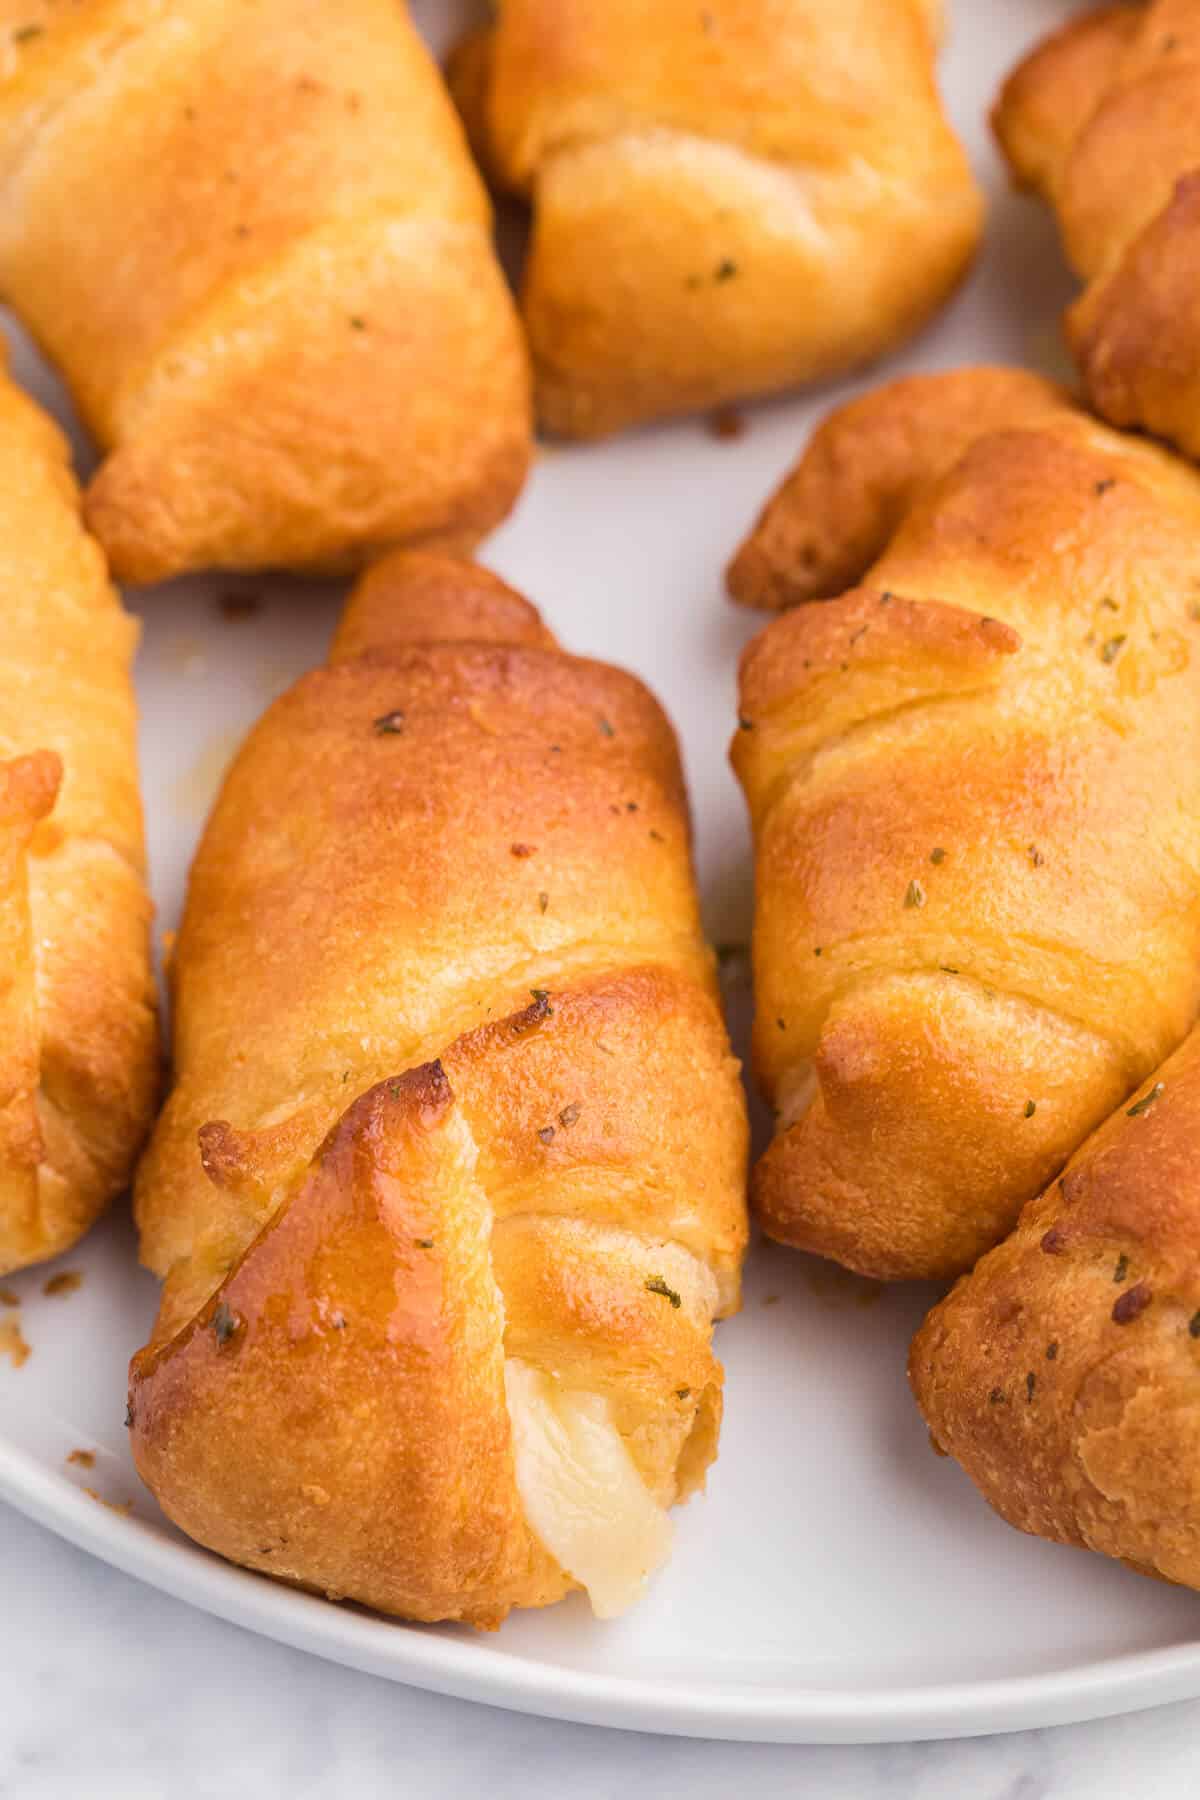 Air Fryer Garlic Cheese Stuffed Crescent Rolls Recipe - Use your air fryer to make this quick and easy snack or appetizer. Pillsbury crescent roll dough is brushed with garlic butter and wrapped around mozzarella cheese. Warning: they are addictive!